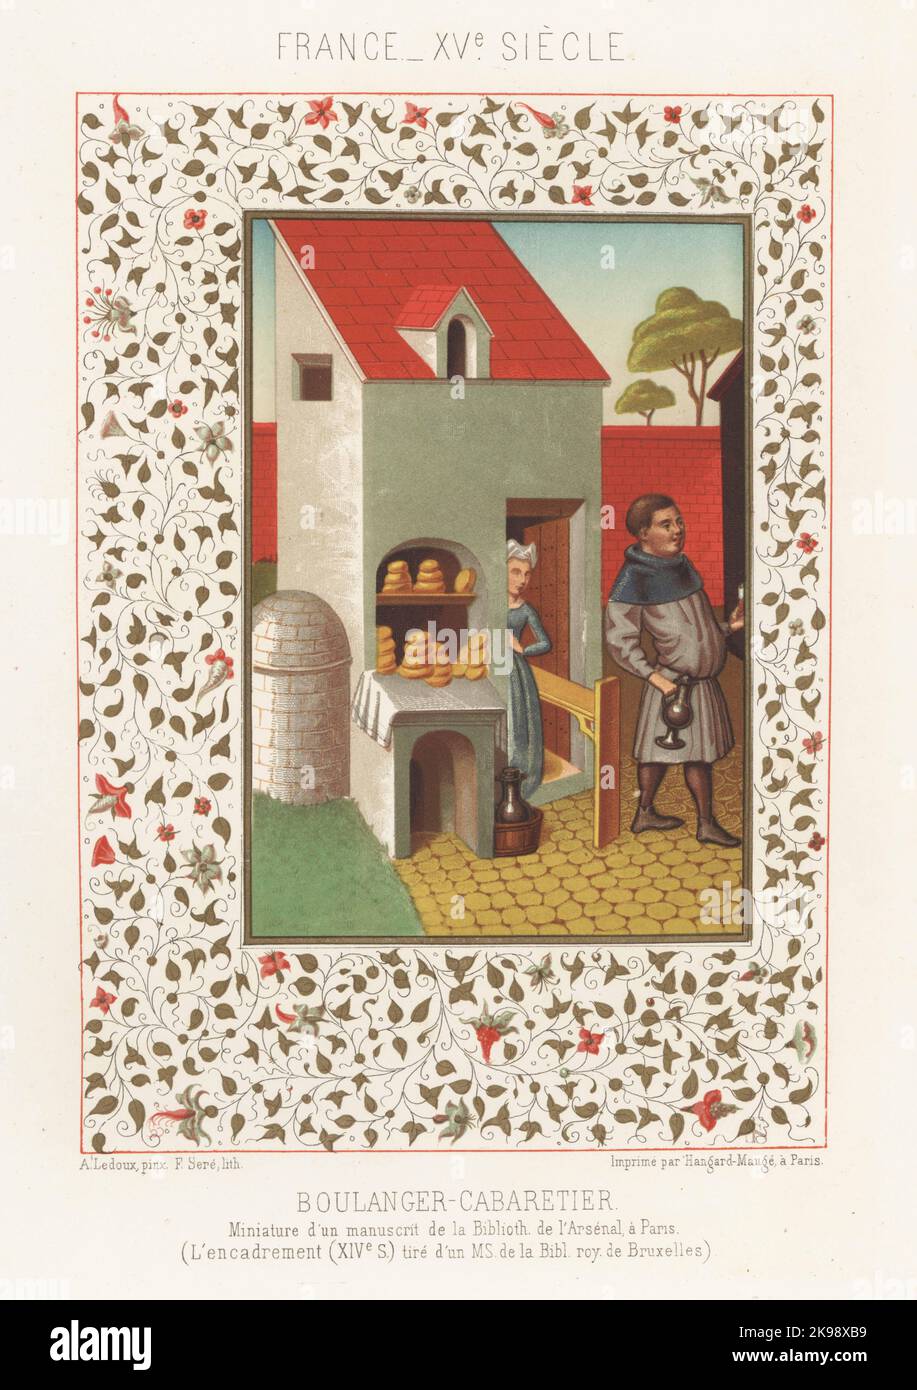 Florentine innkeeper Gerin, famed for his selection of wines, at his bakery-bar or Boulanger-Cabaretier, France, XVe siecle. Miniature from a MS of Giovanni Boccaccio's De Mulieribus Claris in the Bibliotheque de l'Arsenal. Decorative floral frame (14thC) from a MS in the Bibliotheque royale de Bruxelles. Chromolithograph by Ferdinand Sere after an illustration by A. Ledoux from Charles Louandre’s Les Arts Somptuaires, The Sumptuary Arts, Hangard-Mauge, Paris, 1858. Stock Photo